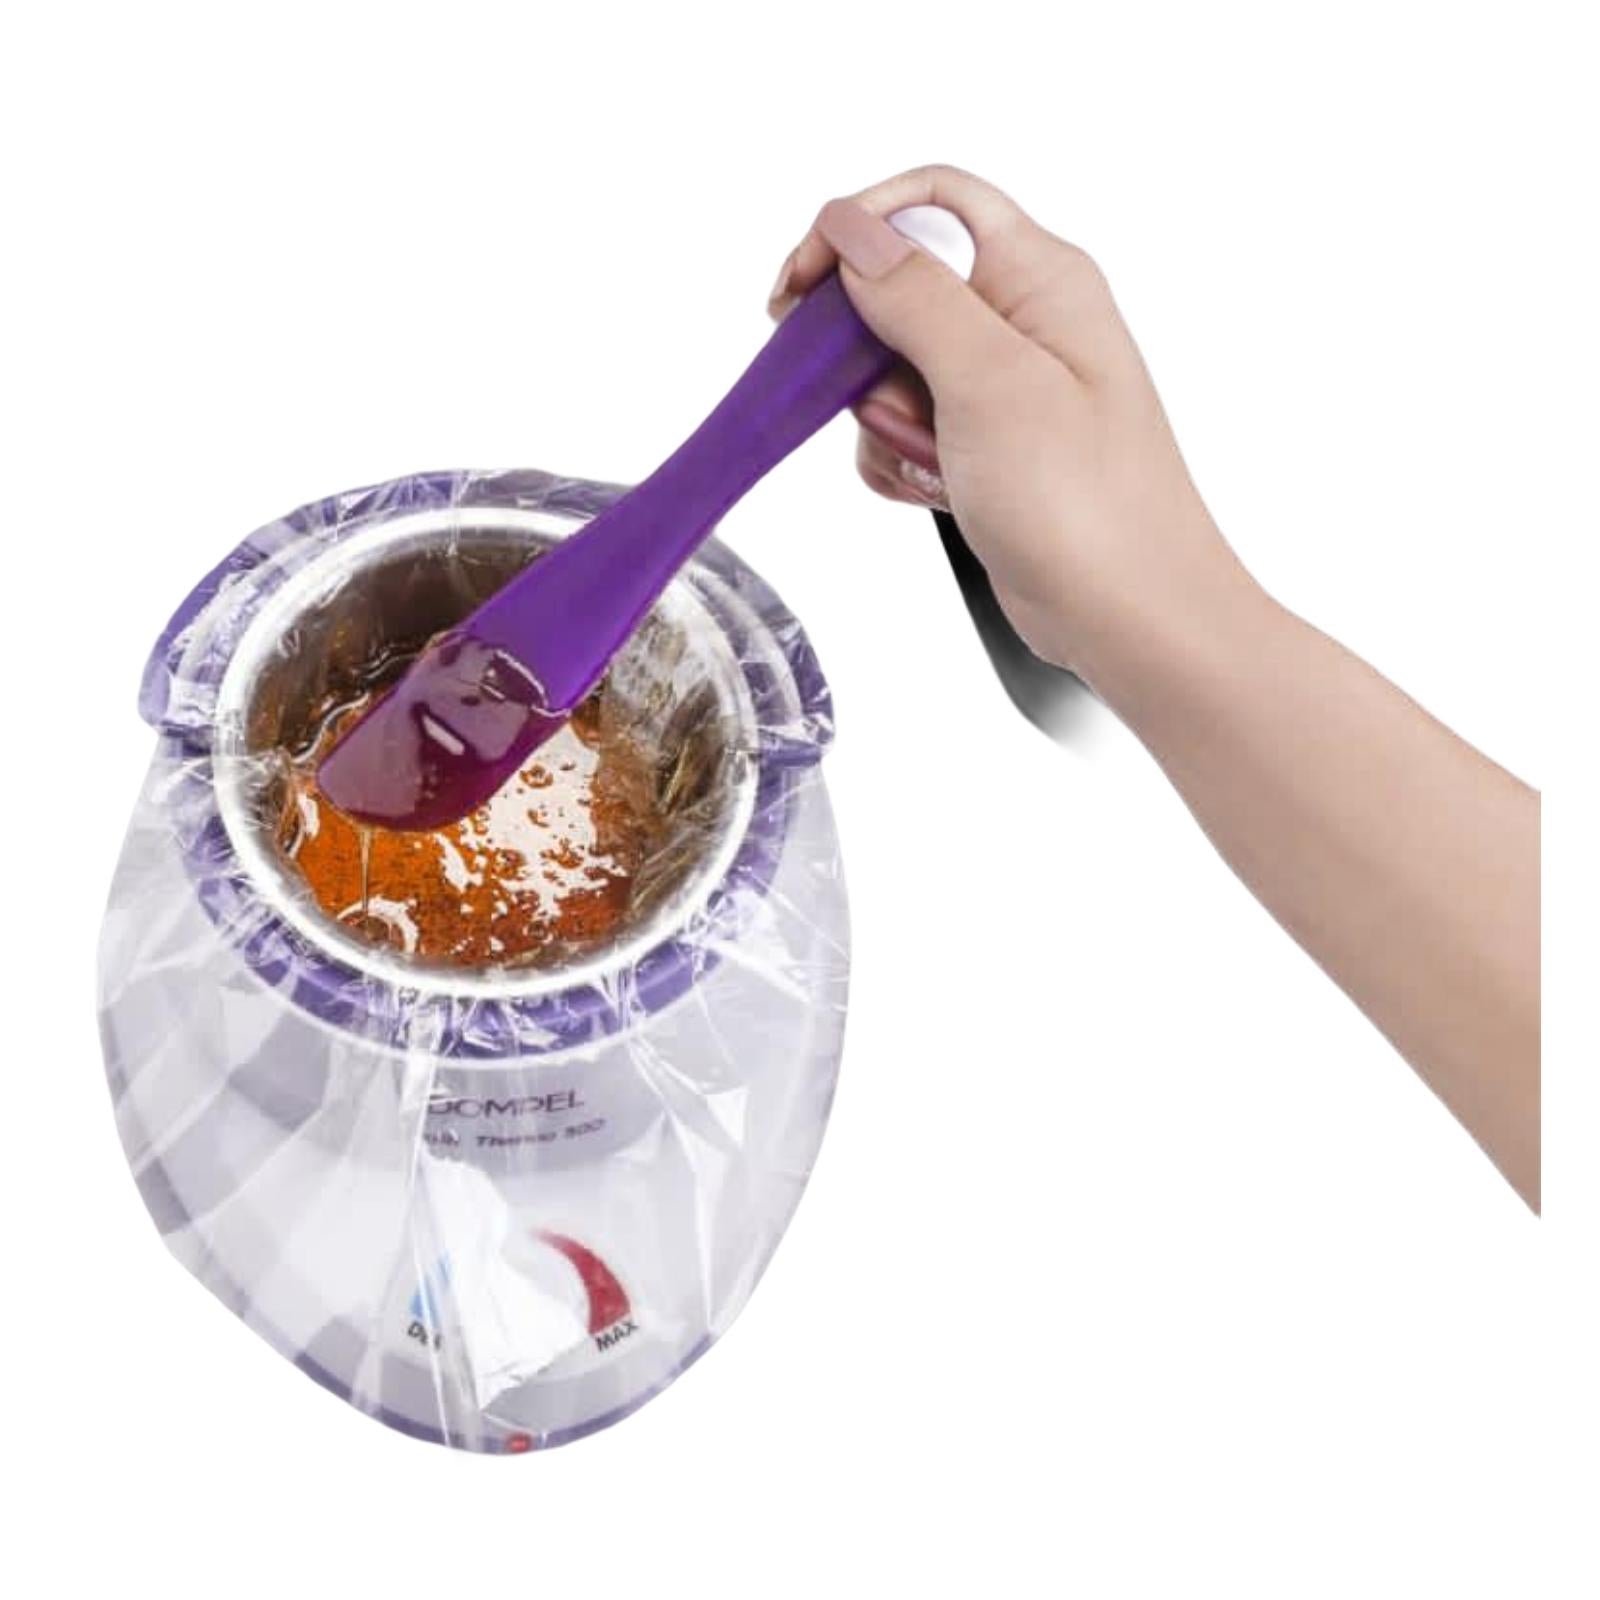 Dompel wax warmer with melted wax and plastic refill, showcasing the waxing process with a spatula